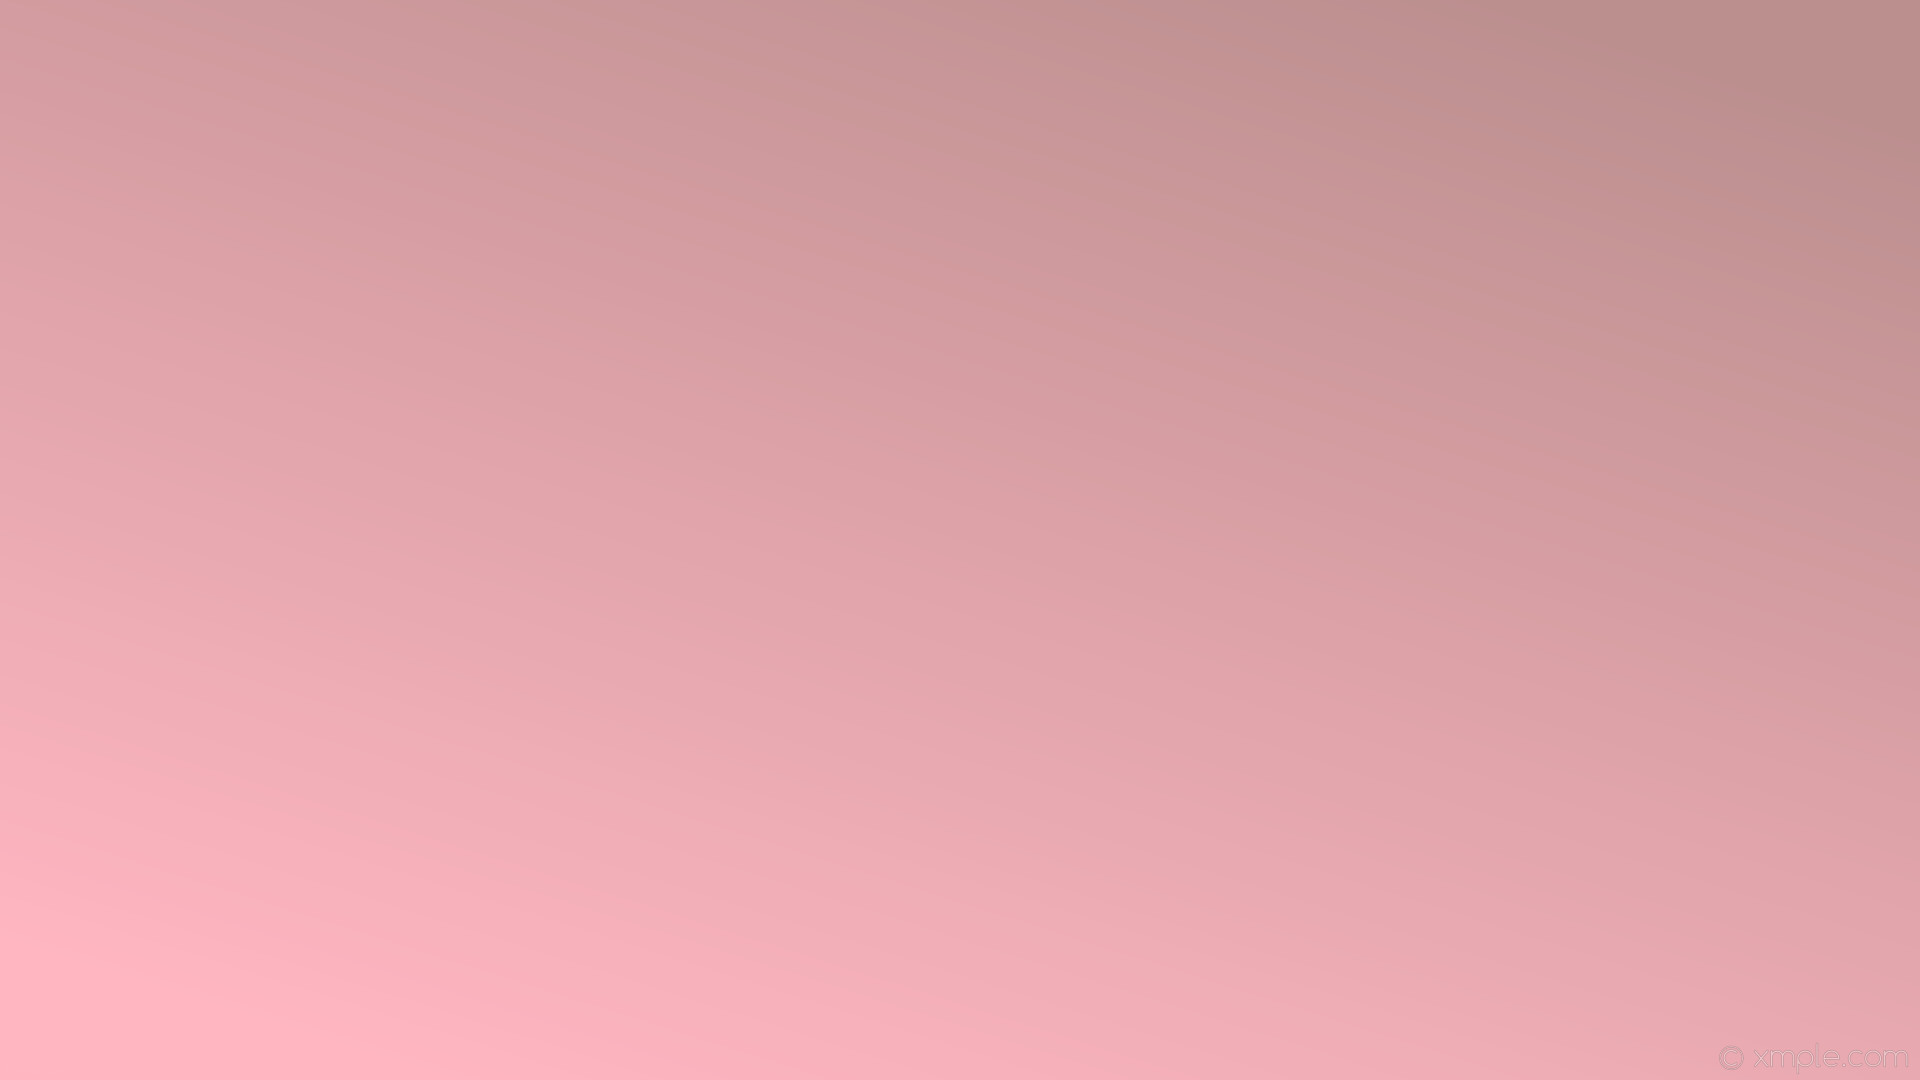 1920x1080 wallpaper pink gradient linear brown rosy brown light pink bc8f8f ffb6c1 45a‚a